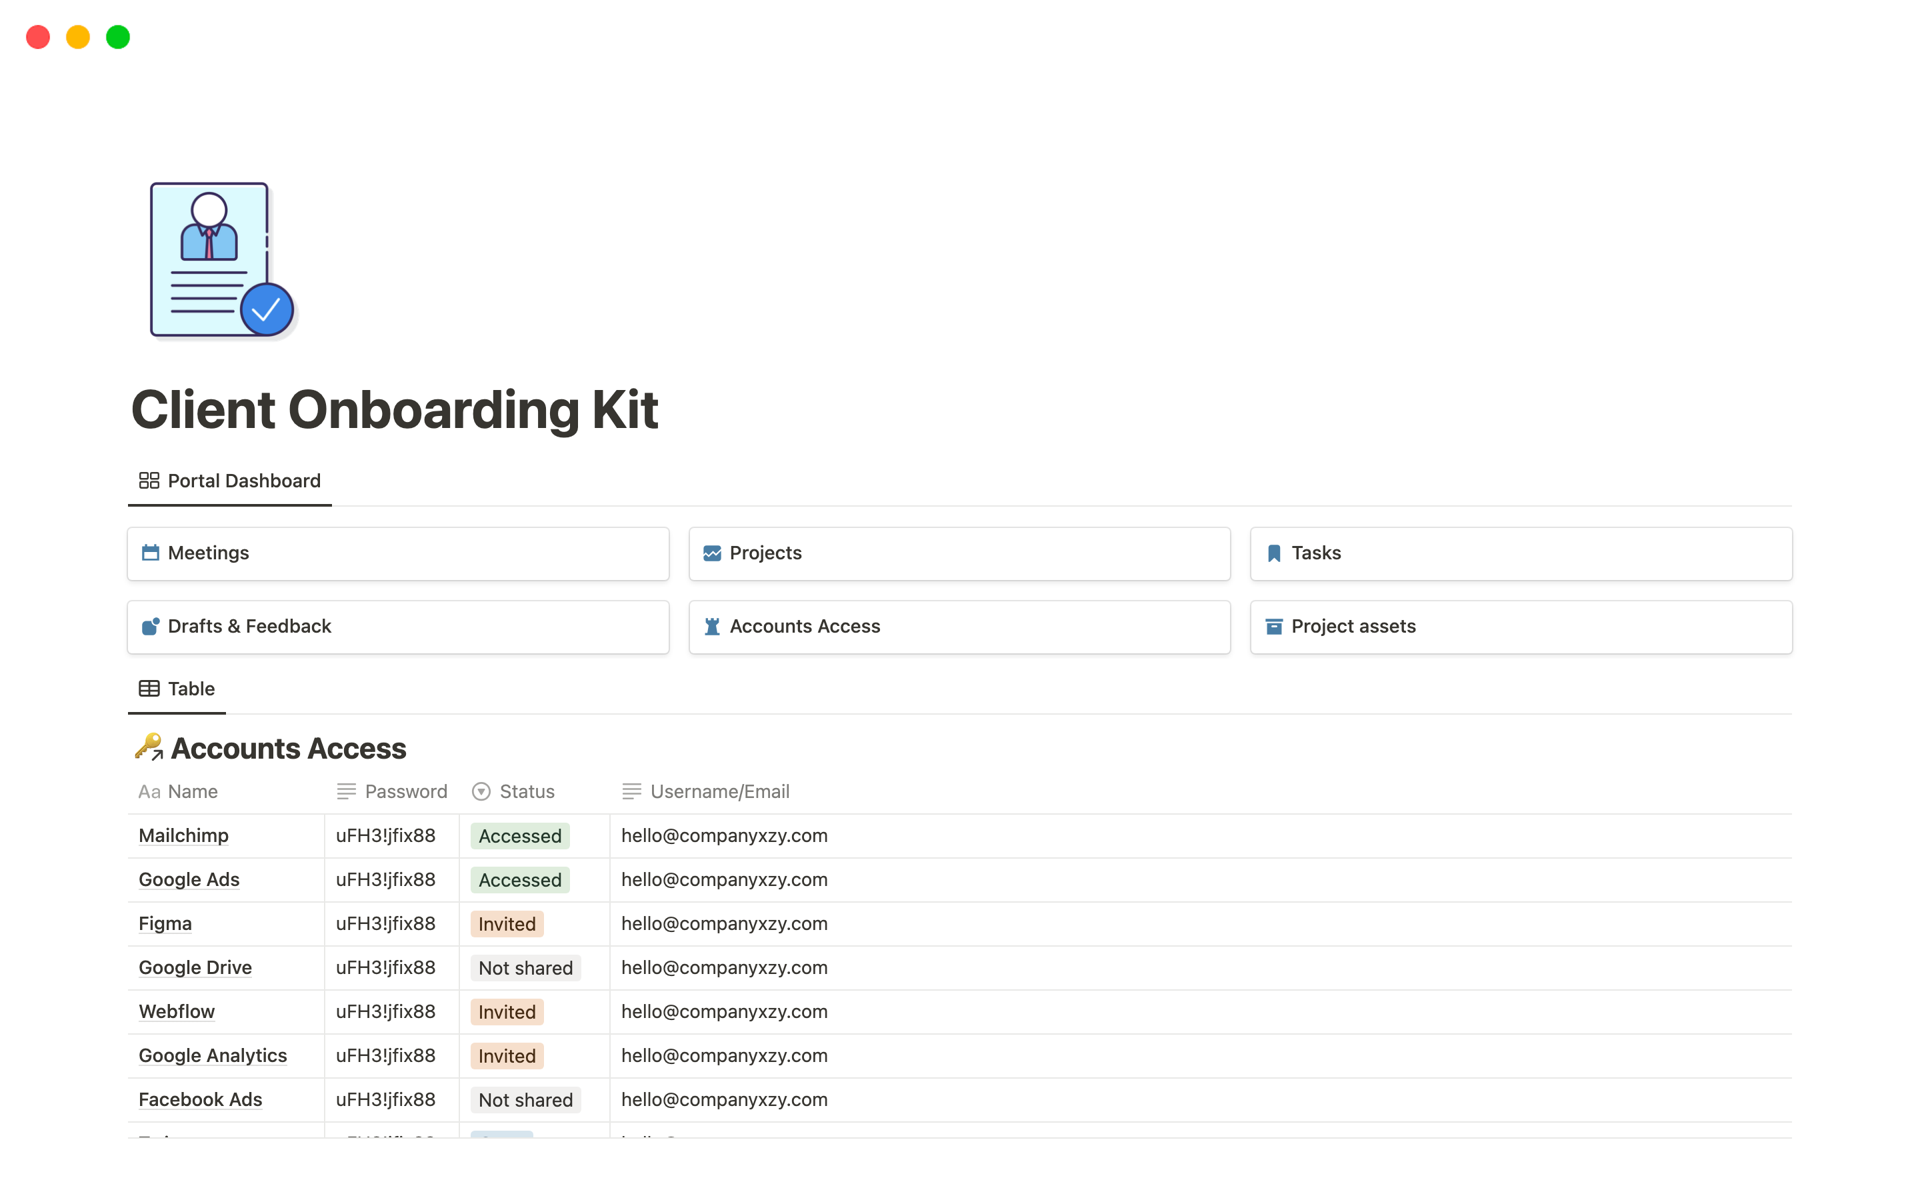 Efficiently onboard your clients and manage your projects with ease. A versatile toolkit designed to streamline your client onboarding process and keep everything organized from start to finish. 